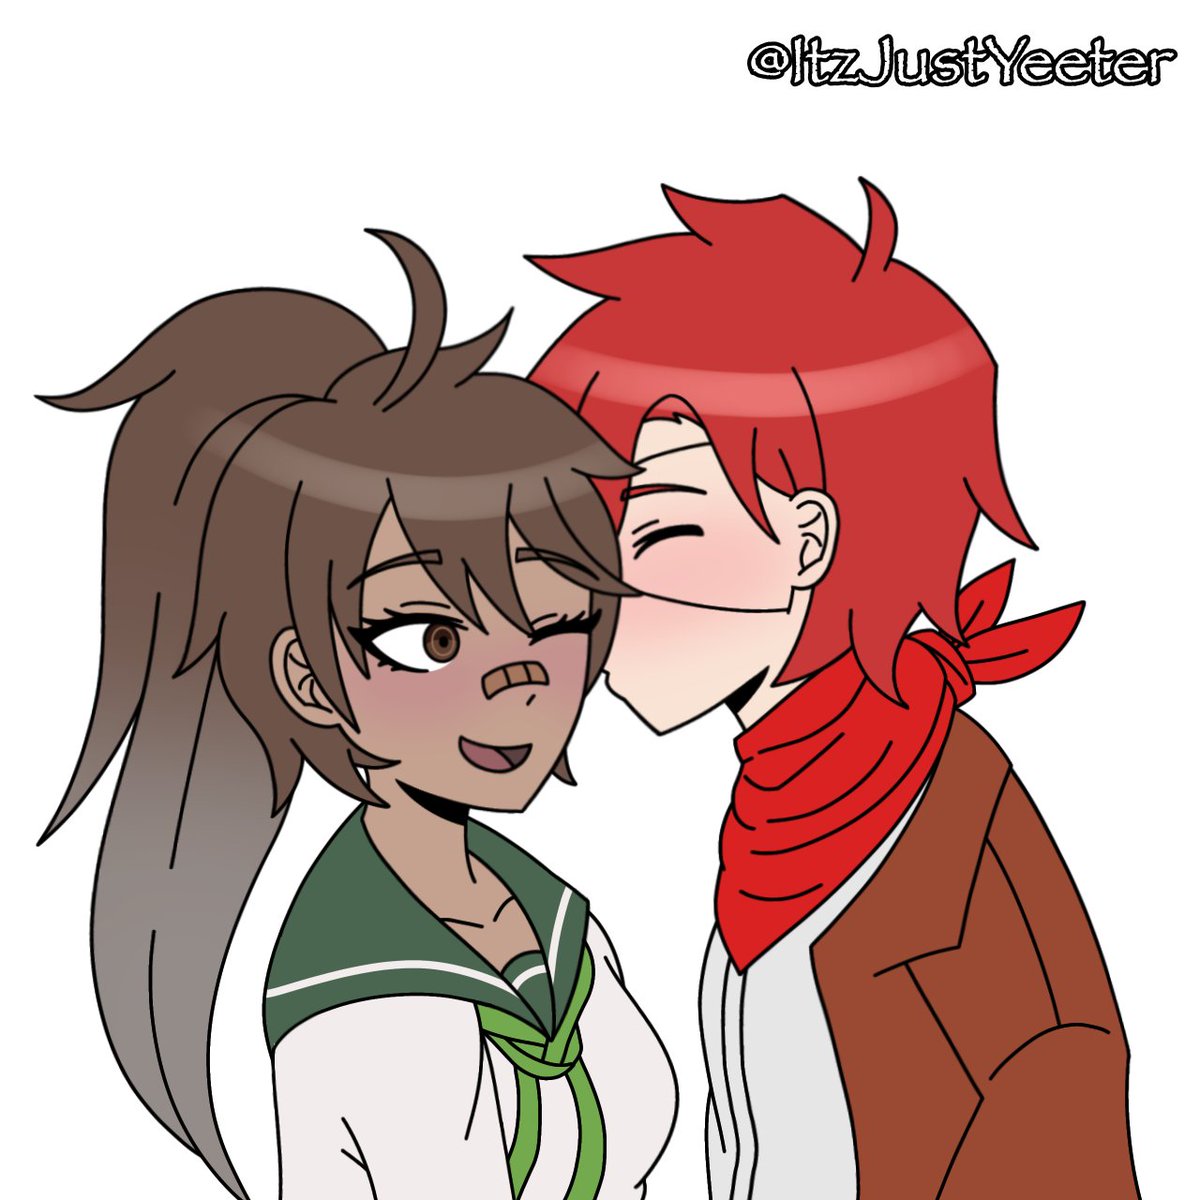 I live for this ship! The end of chapter 1 ever existed!! 💯💯

#drdt #danganronpadespairtime #xandermatthews #terukotawaki #drdtxandermathews #drdtterukotawaki #xanruko